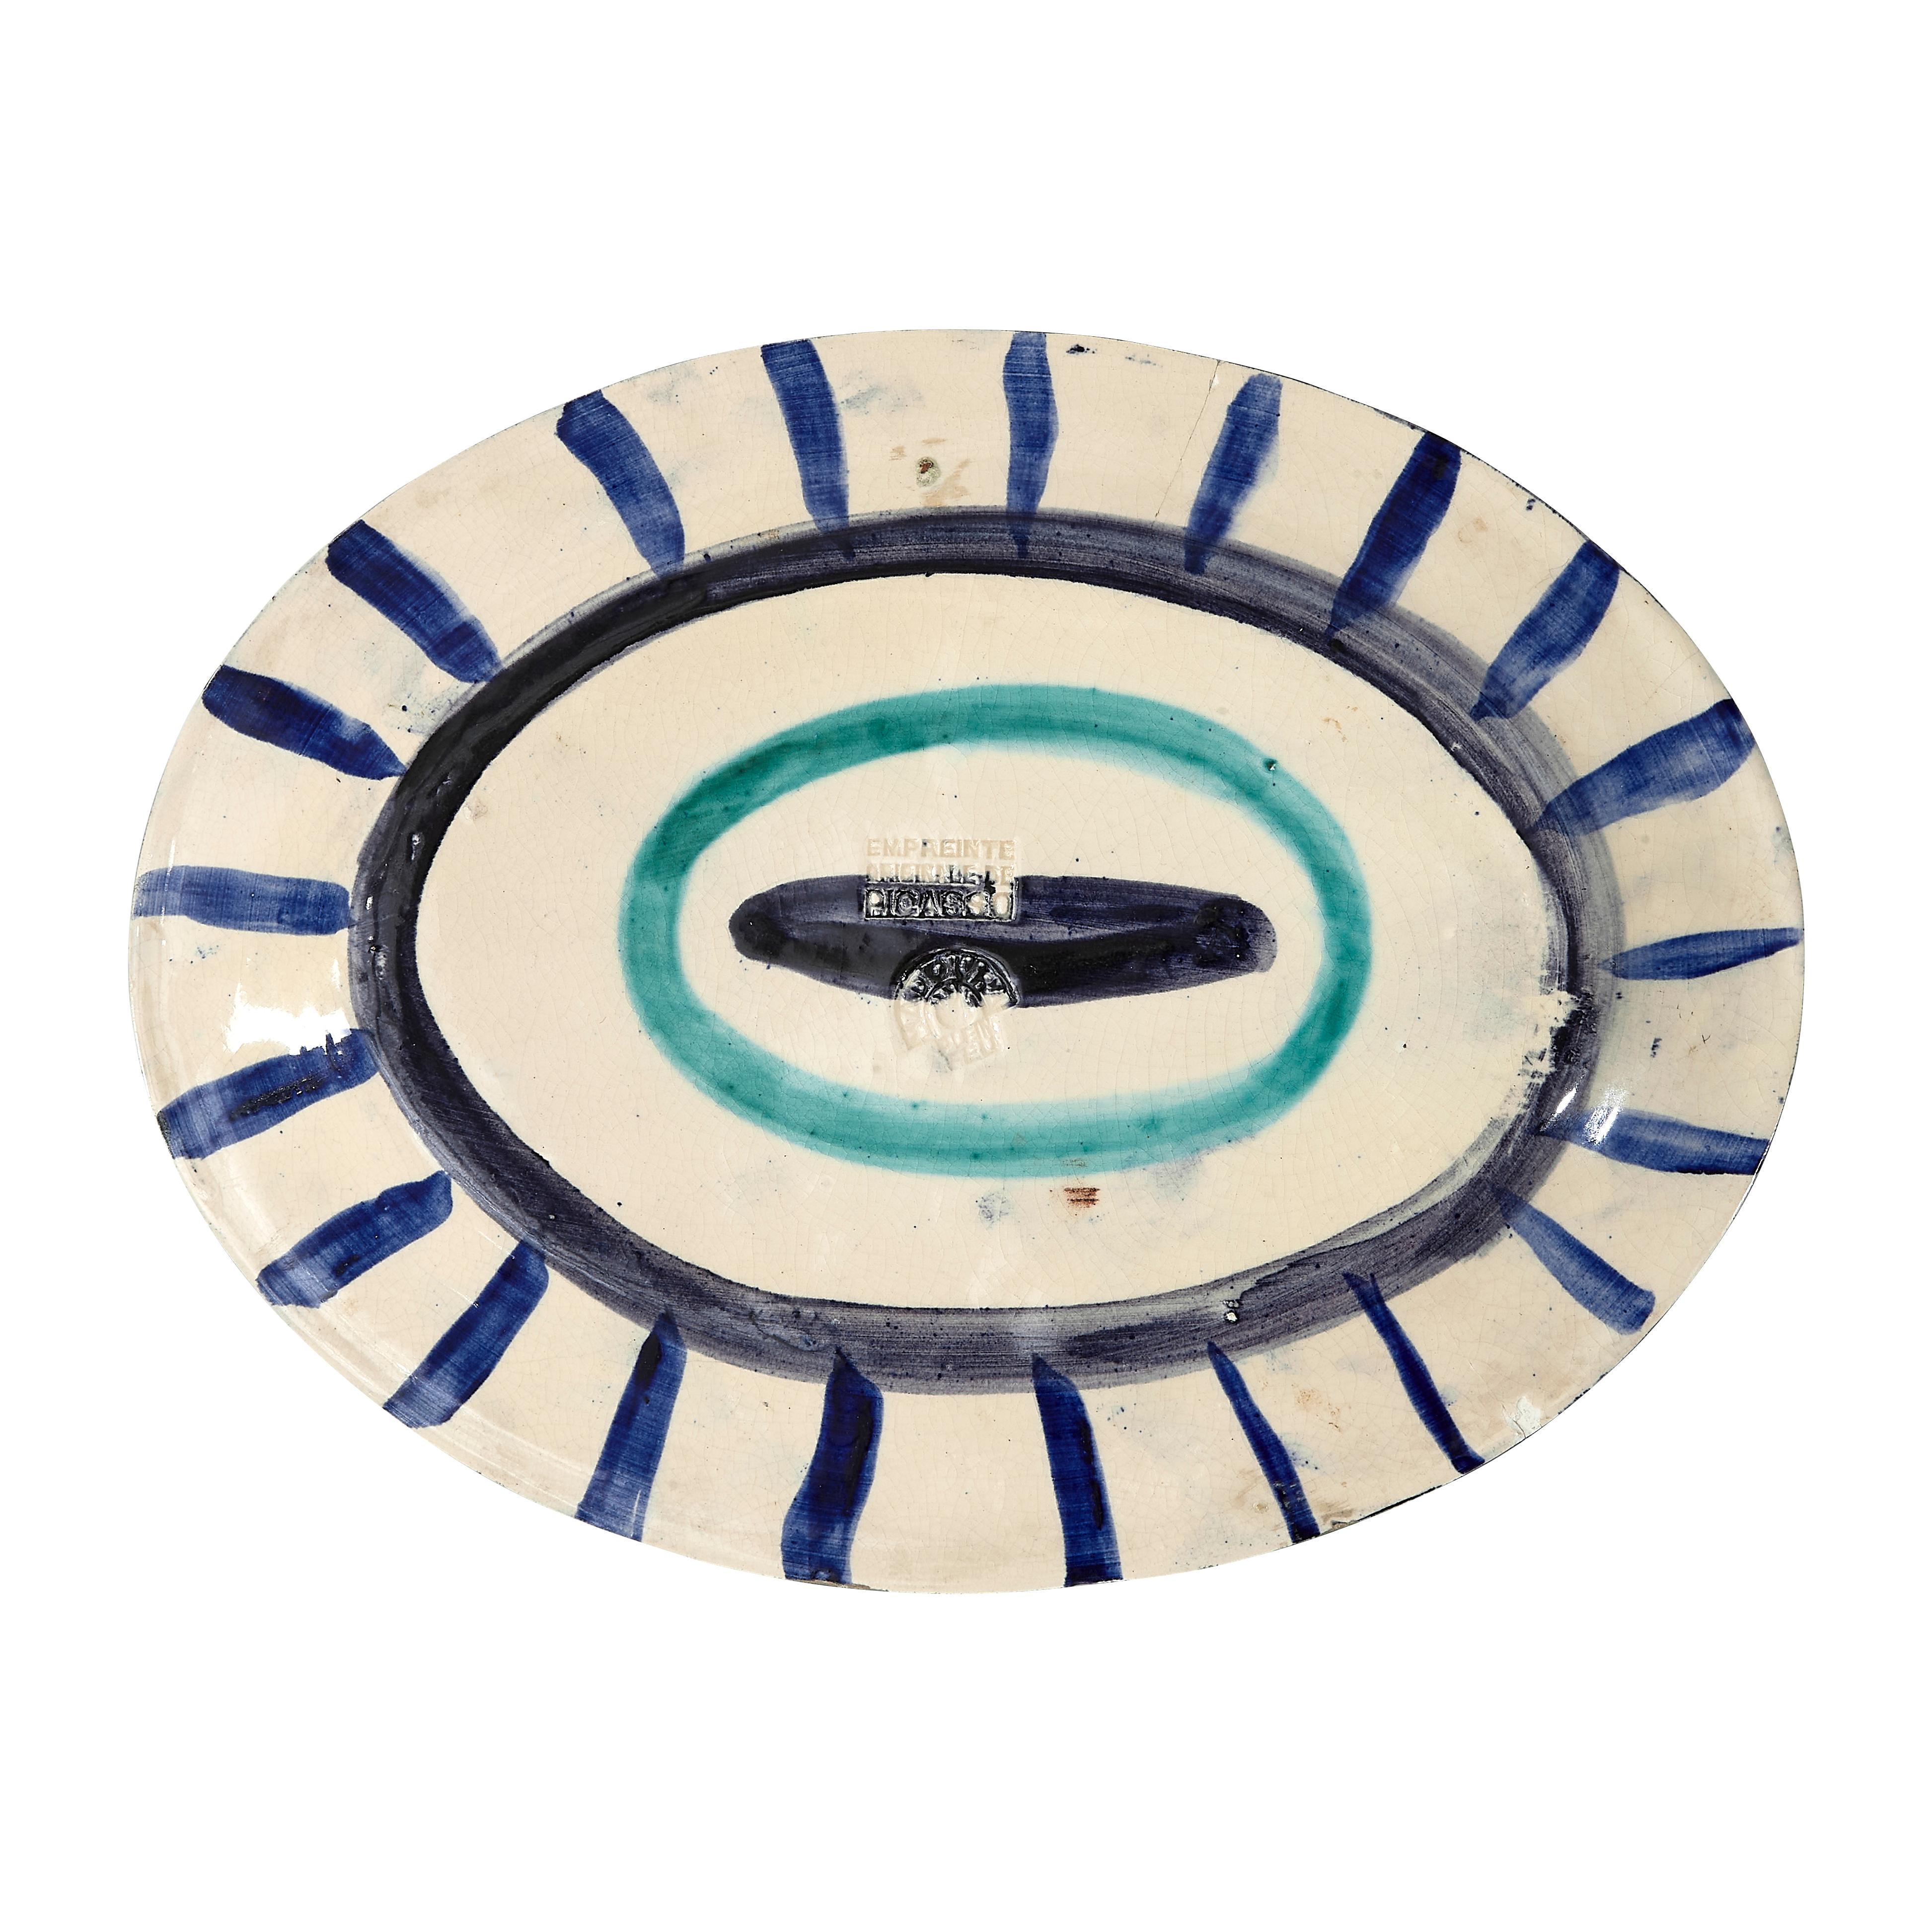 PABLO PICASSO (1881-1973) 
Poisson de profil (A. R. 131) 

Terre de faïence plate, painted in colors and glazed, 1951, from the edition of 25, with the Empreinte Originale de Picasso and Madoura stamps.